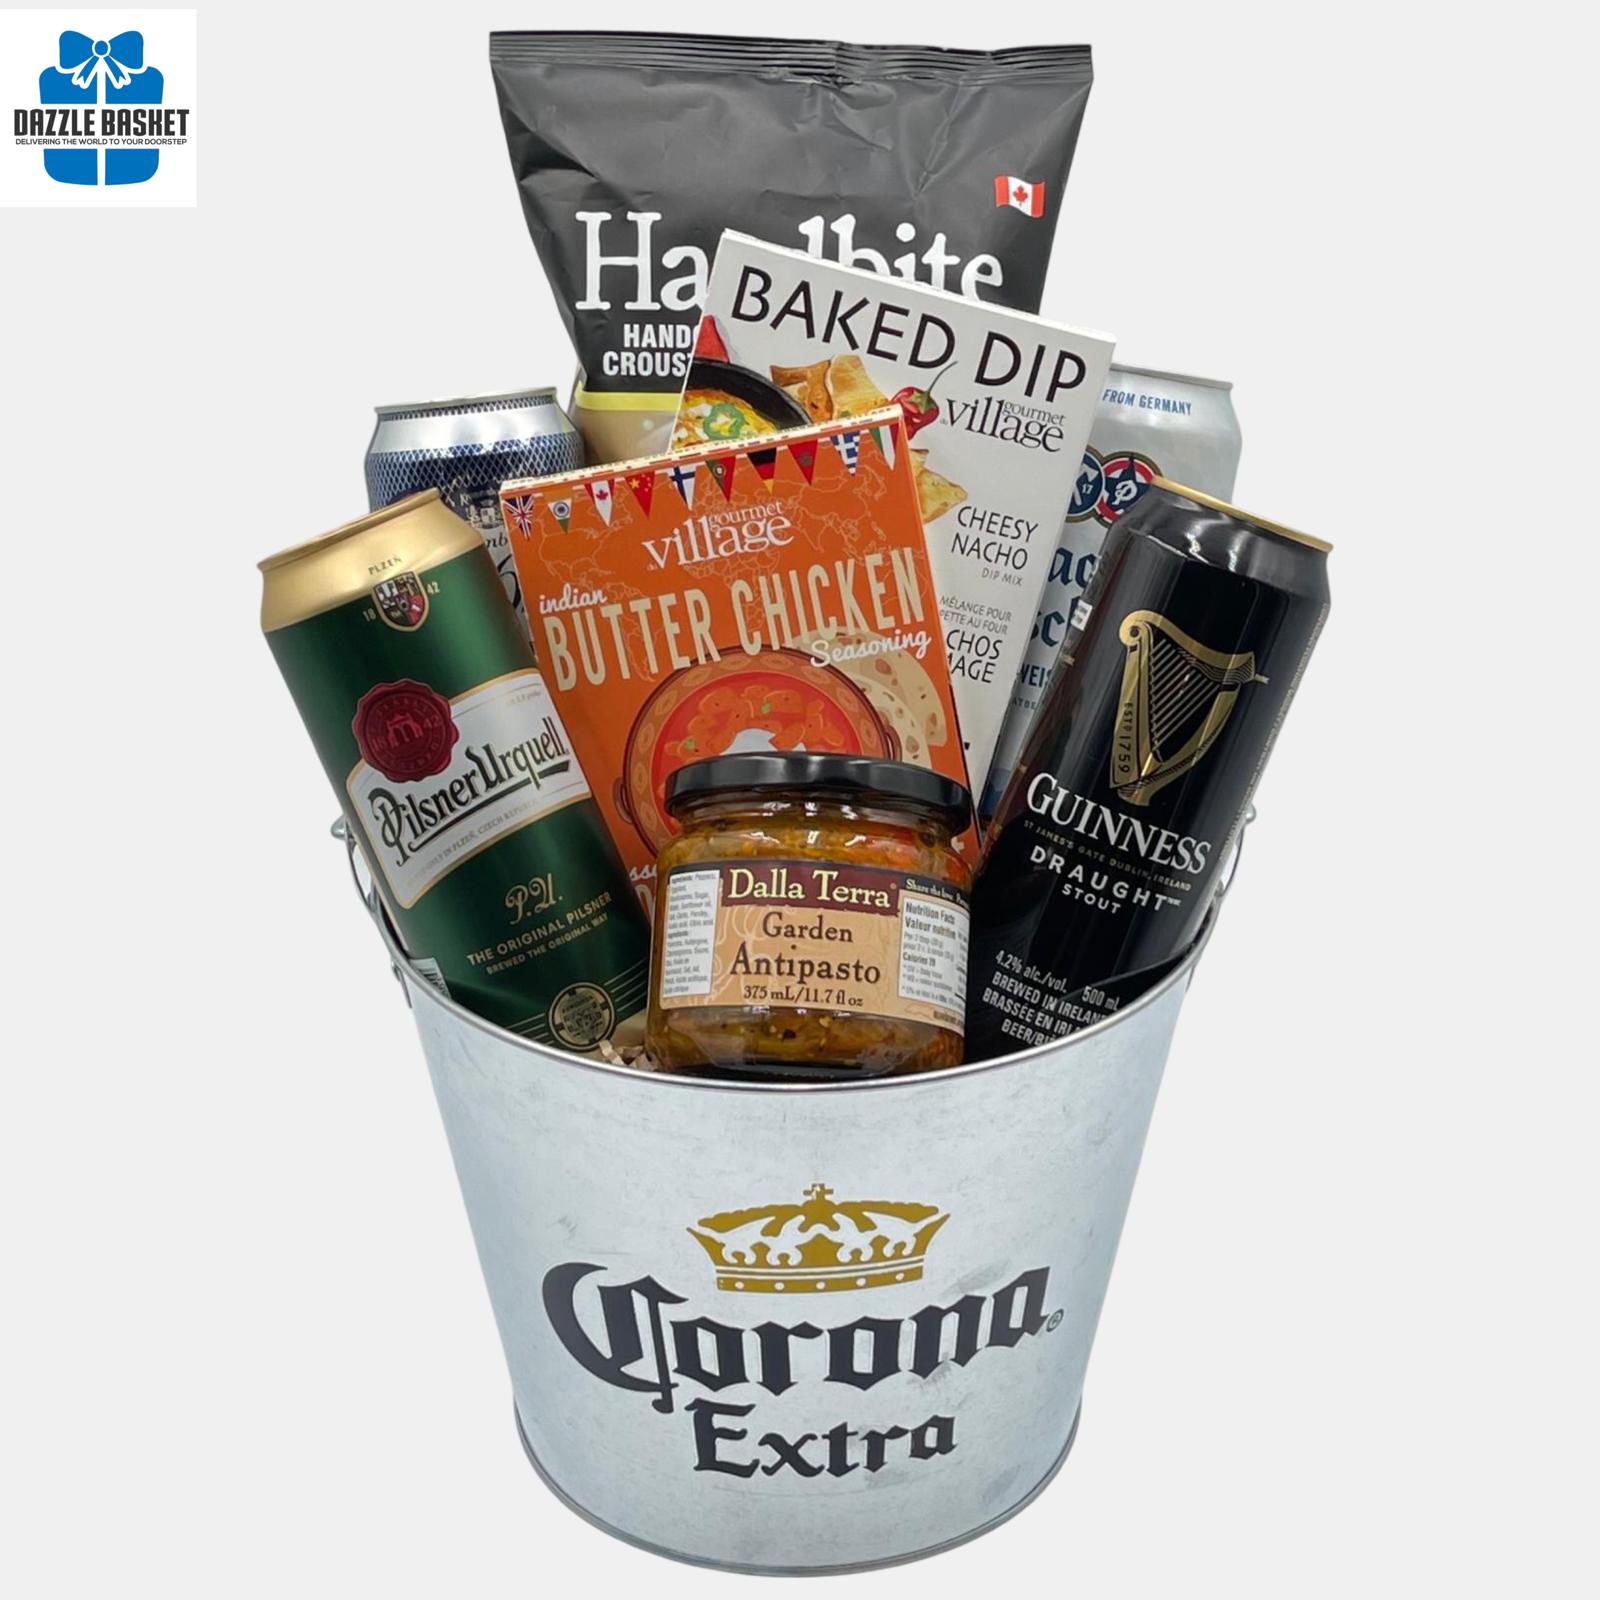 A made in Calgary beer gift basket made in a metal container that contains four cans of premium beer, chips and other food products.